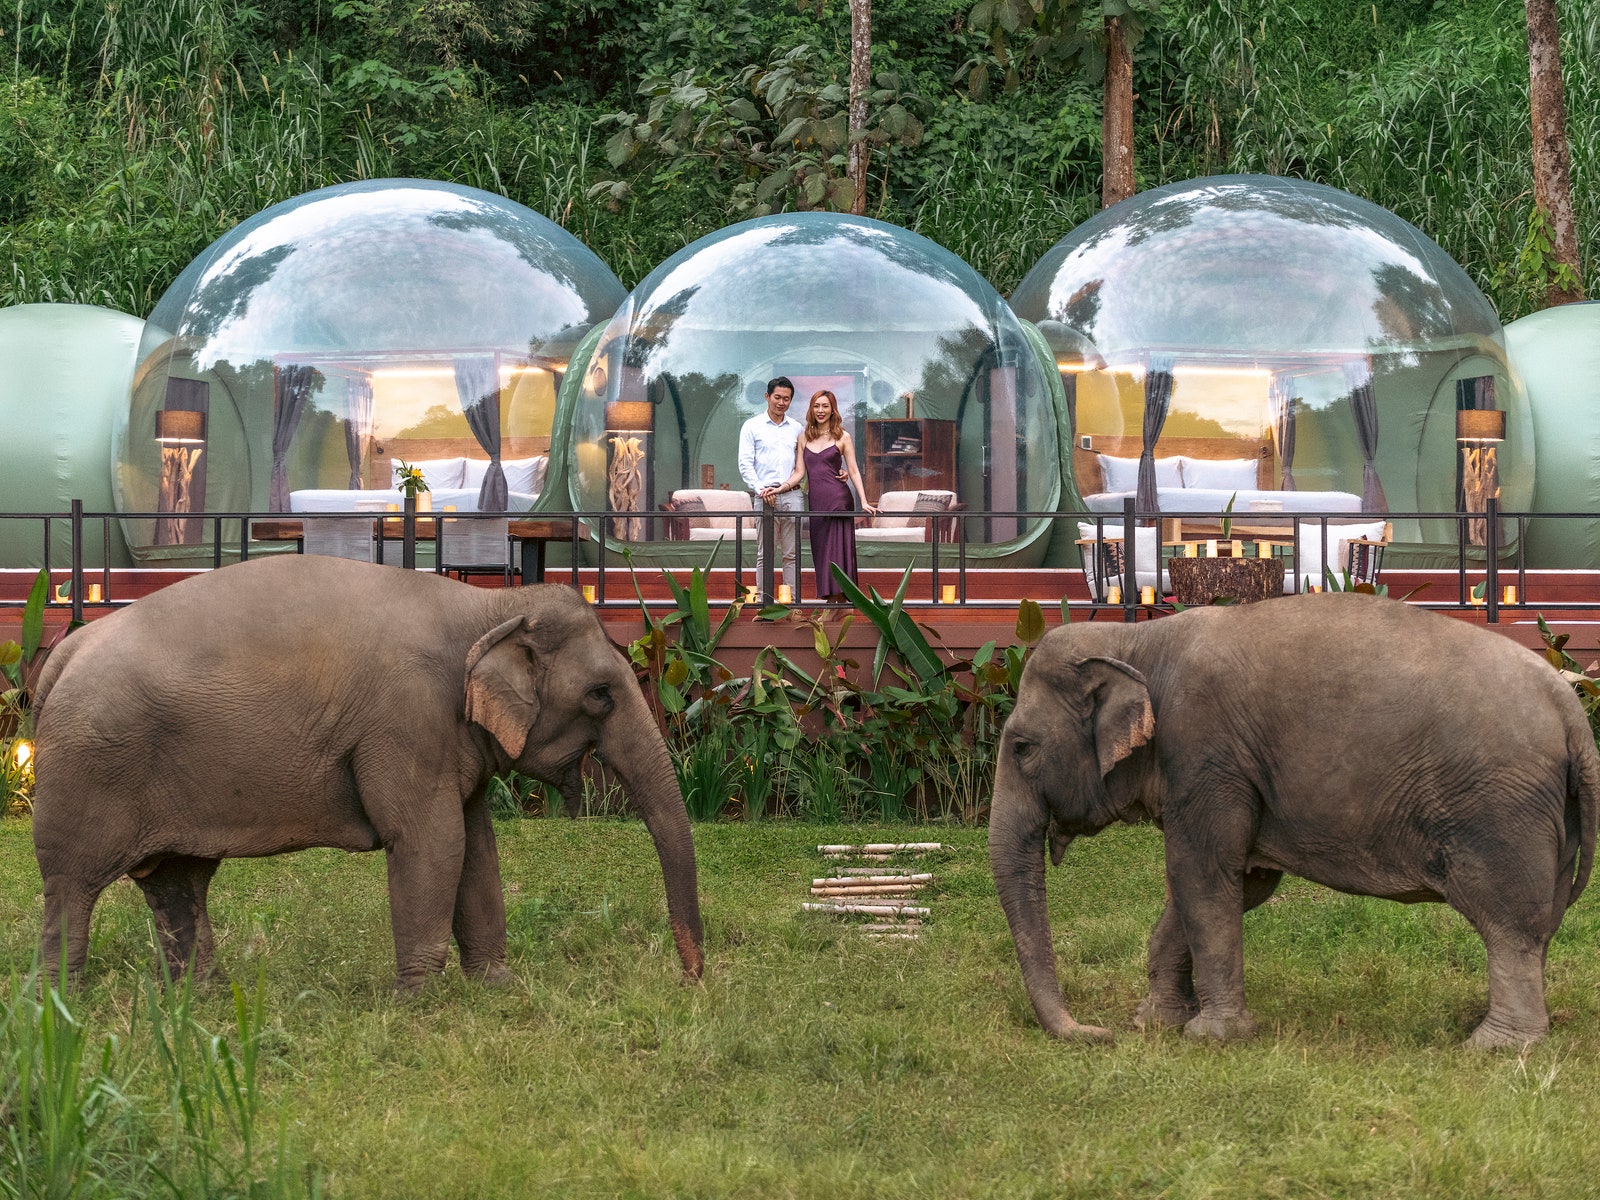 Two elephants facing each other standing in front of a clear bubble hotel room